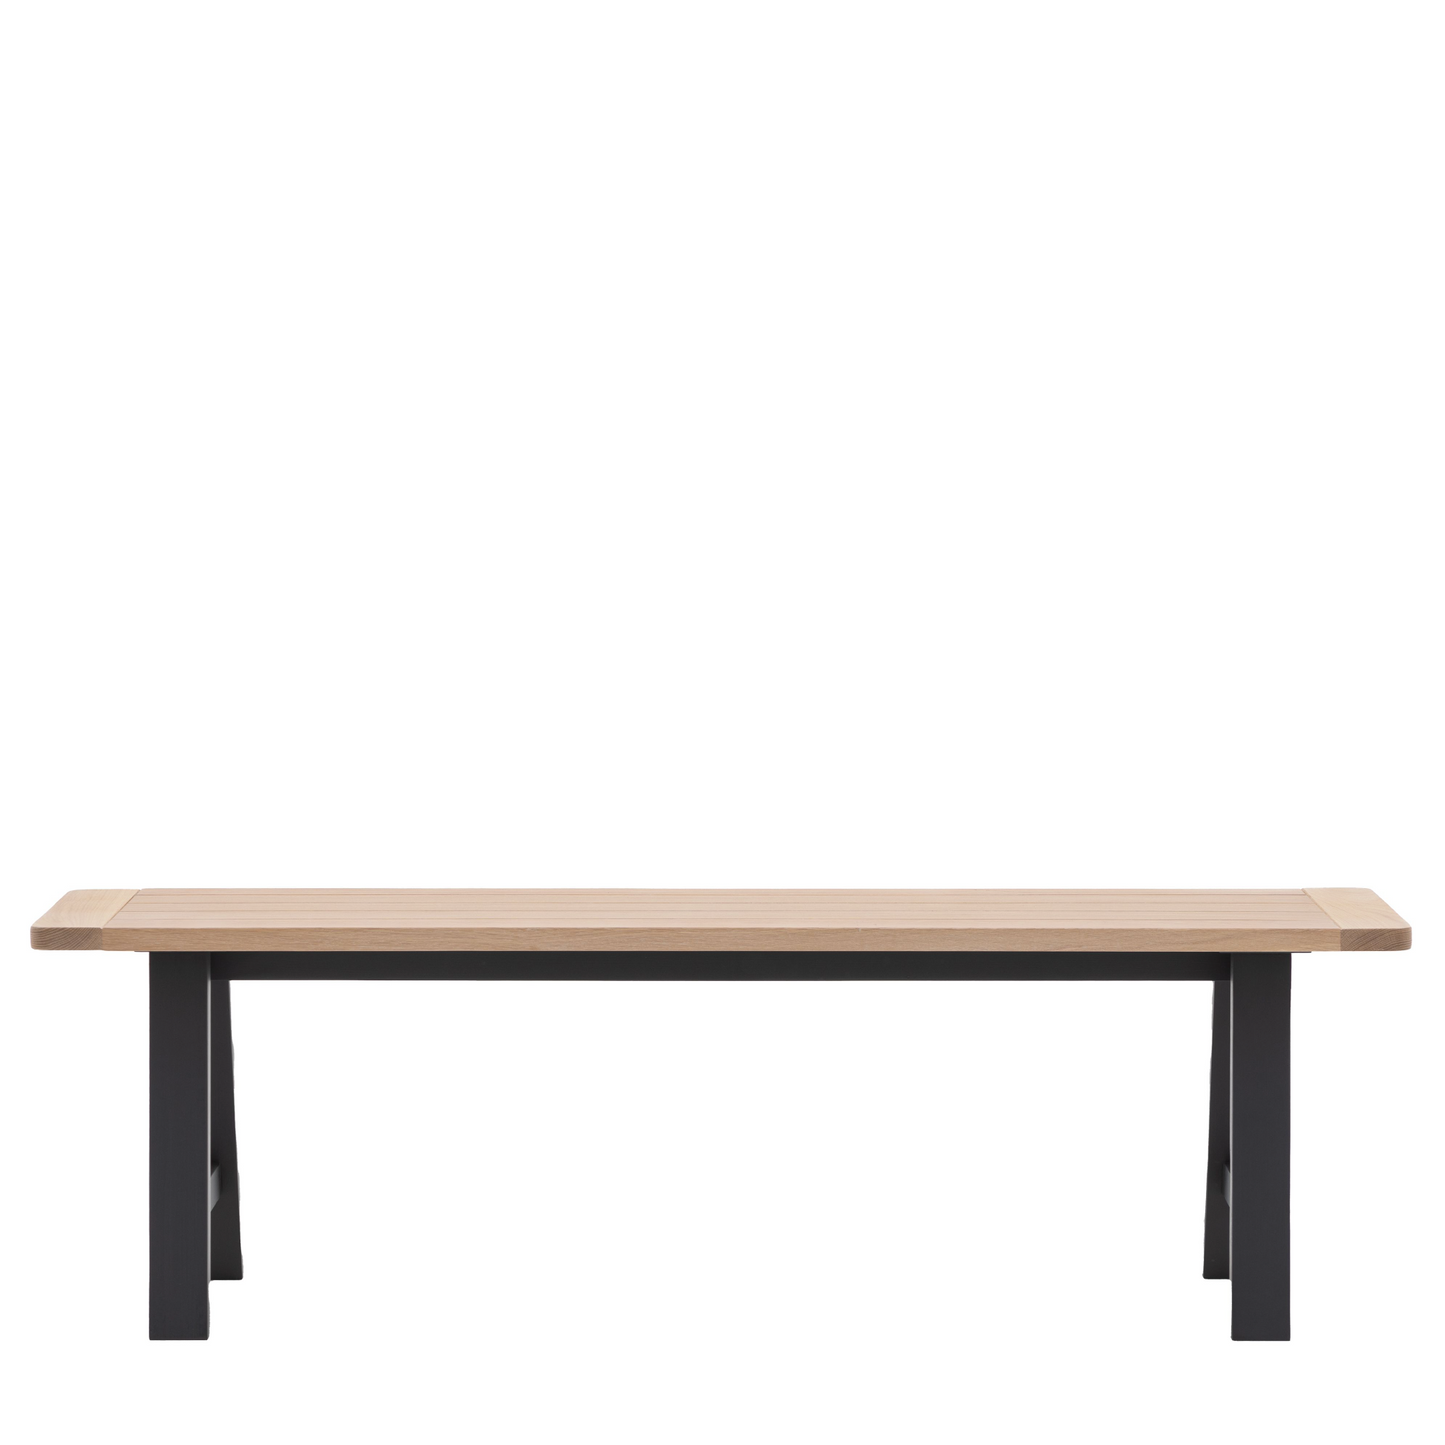 A Buckland Trestle Bench with black legs on a white background, perfect for interior decor.